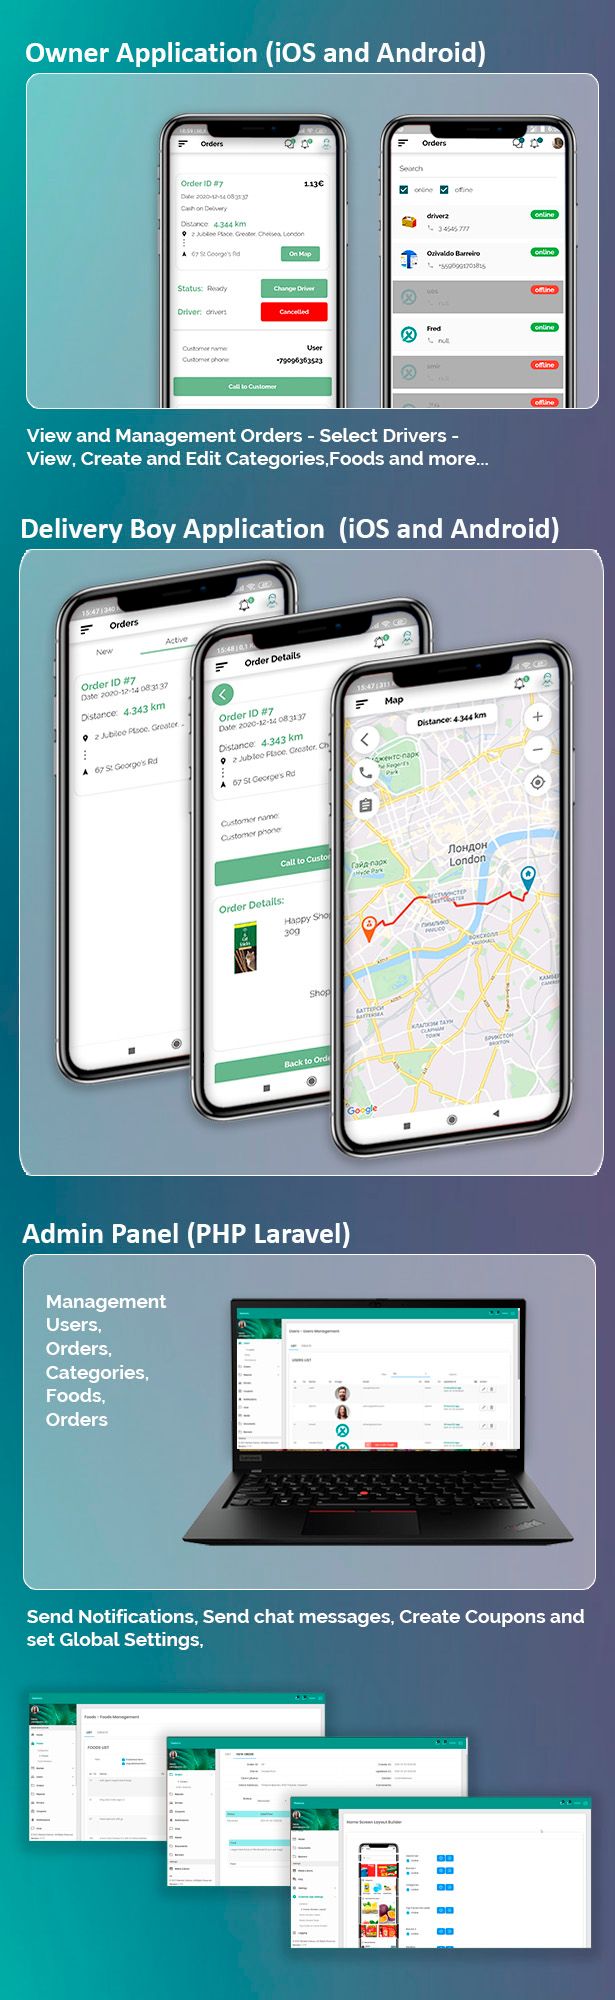 Single Market Grocery/Food/Pharmacy (Android+iOS+Admin Panel) Full App Solution with Web Site - 3